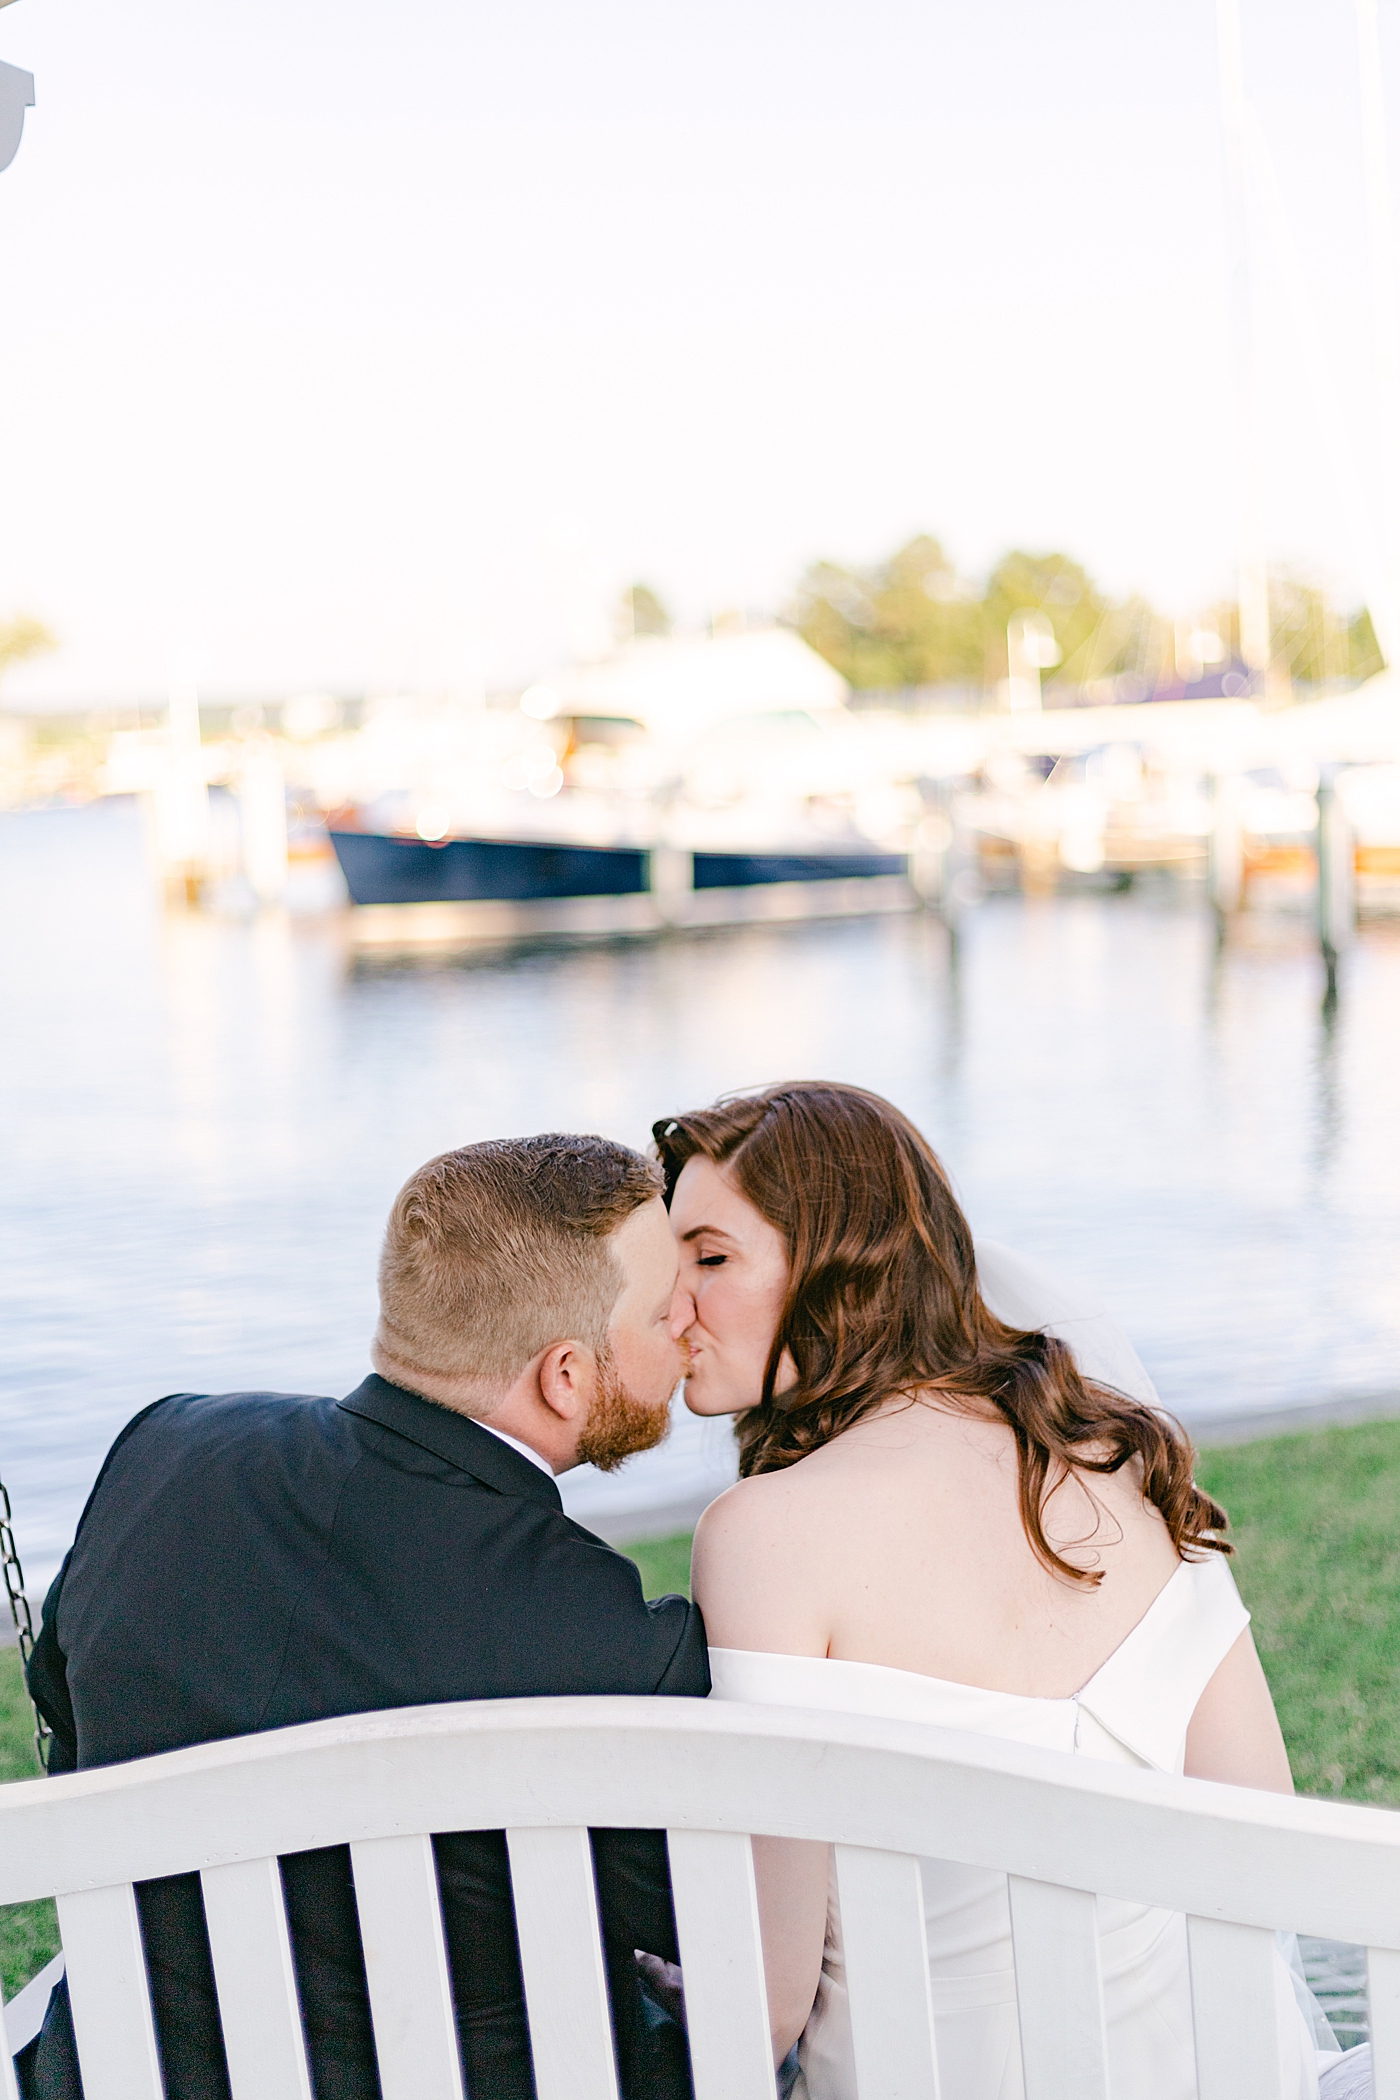 Bride and groom kiss on a bench near a harbor | Photo by Hope Helmuth Photography